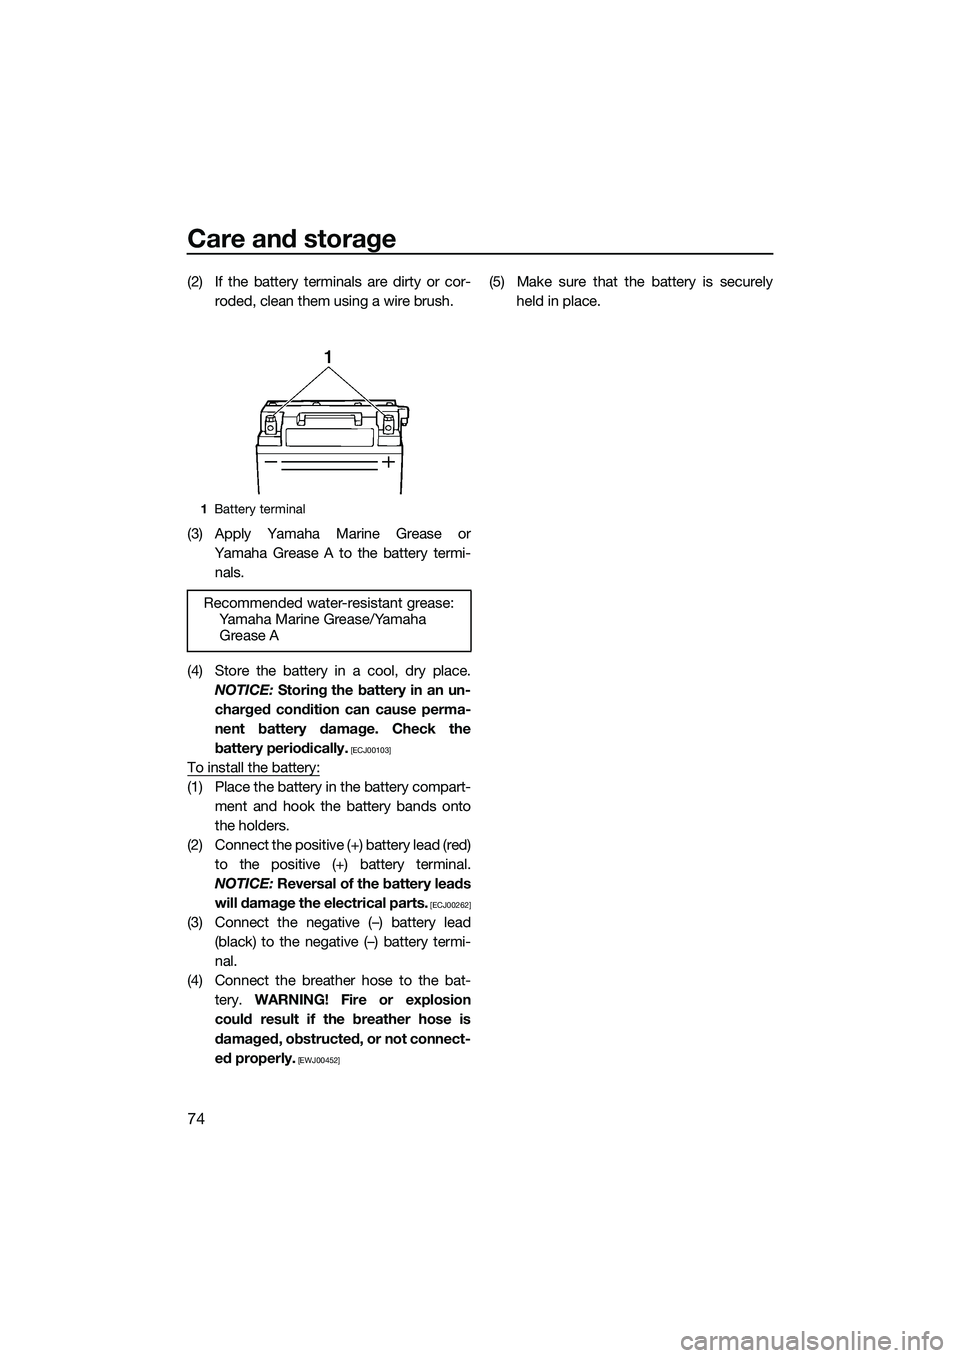 YAMAHA VXS 2014  Owners Manual Care and storage
74
(2) If the battery terminals are dirty or cor-roded, clean them using a wire brush.
(3) Apply Yamaha Marine Grease or Yamaha Grease A to the battery termi-nals.
(4) Store the batte